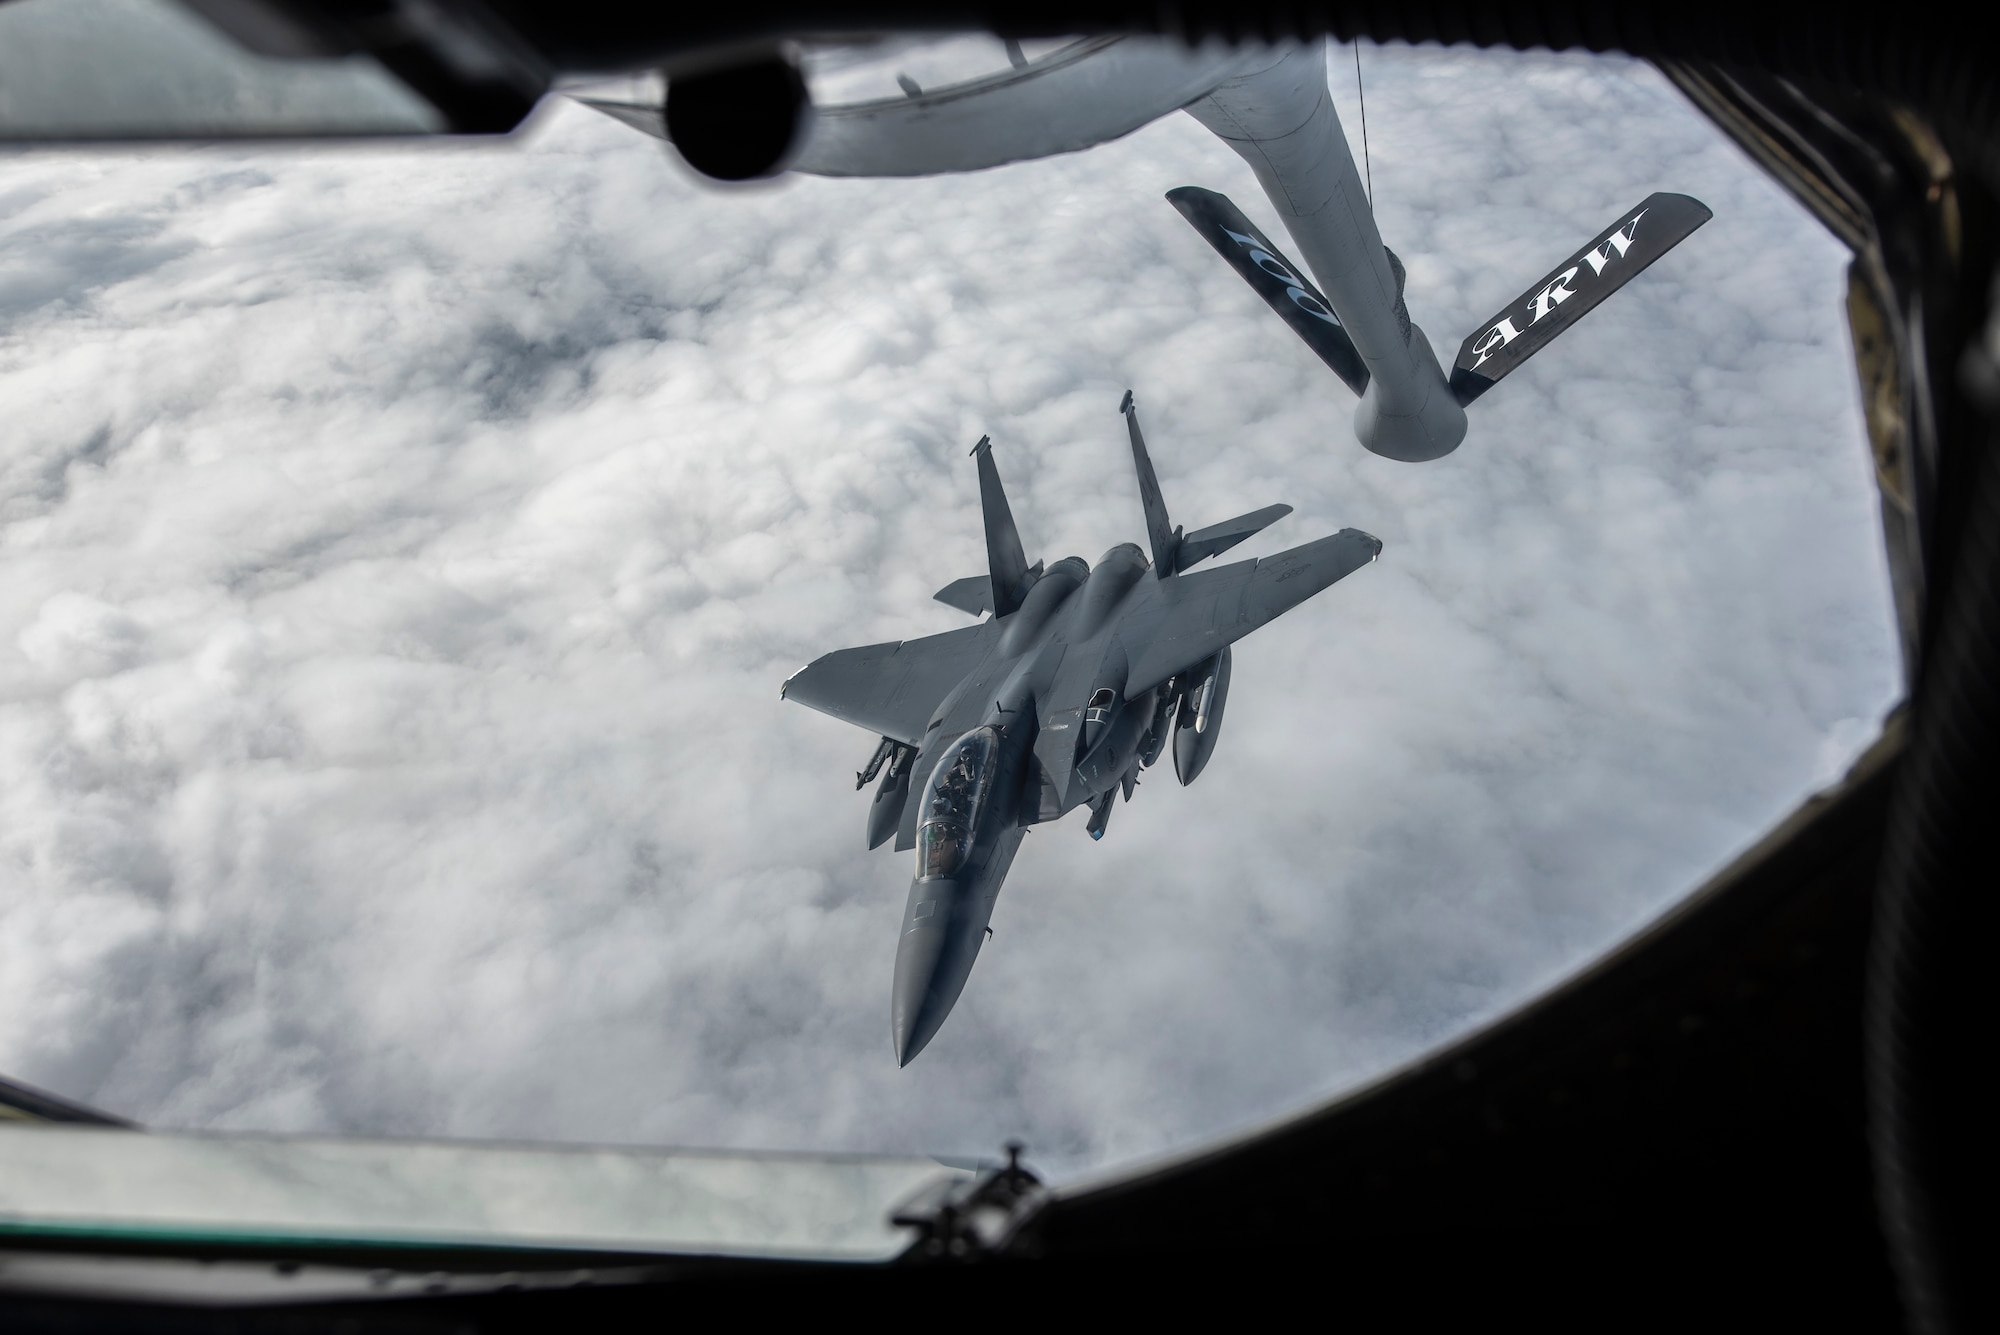 A 48th Fighter Wing F-15E Strike Eagle prepares to connect with a KC-135 Stratotanker for aerial refueling on the way to Amari Air Base, Estonia, in support of Exercise Baltic Trident, March 15, 2021. Incorporating Agile Combat Employment concepts into exercises like Baltic Trident increases lethality and enhances interoperability with NATO allies and partner nations, ensuring the ability to counter military aggression and coercion by sharing responsibilities for common defense. (U.S. Air Force photo by Airman 1st Class Jessi Monte)